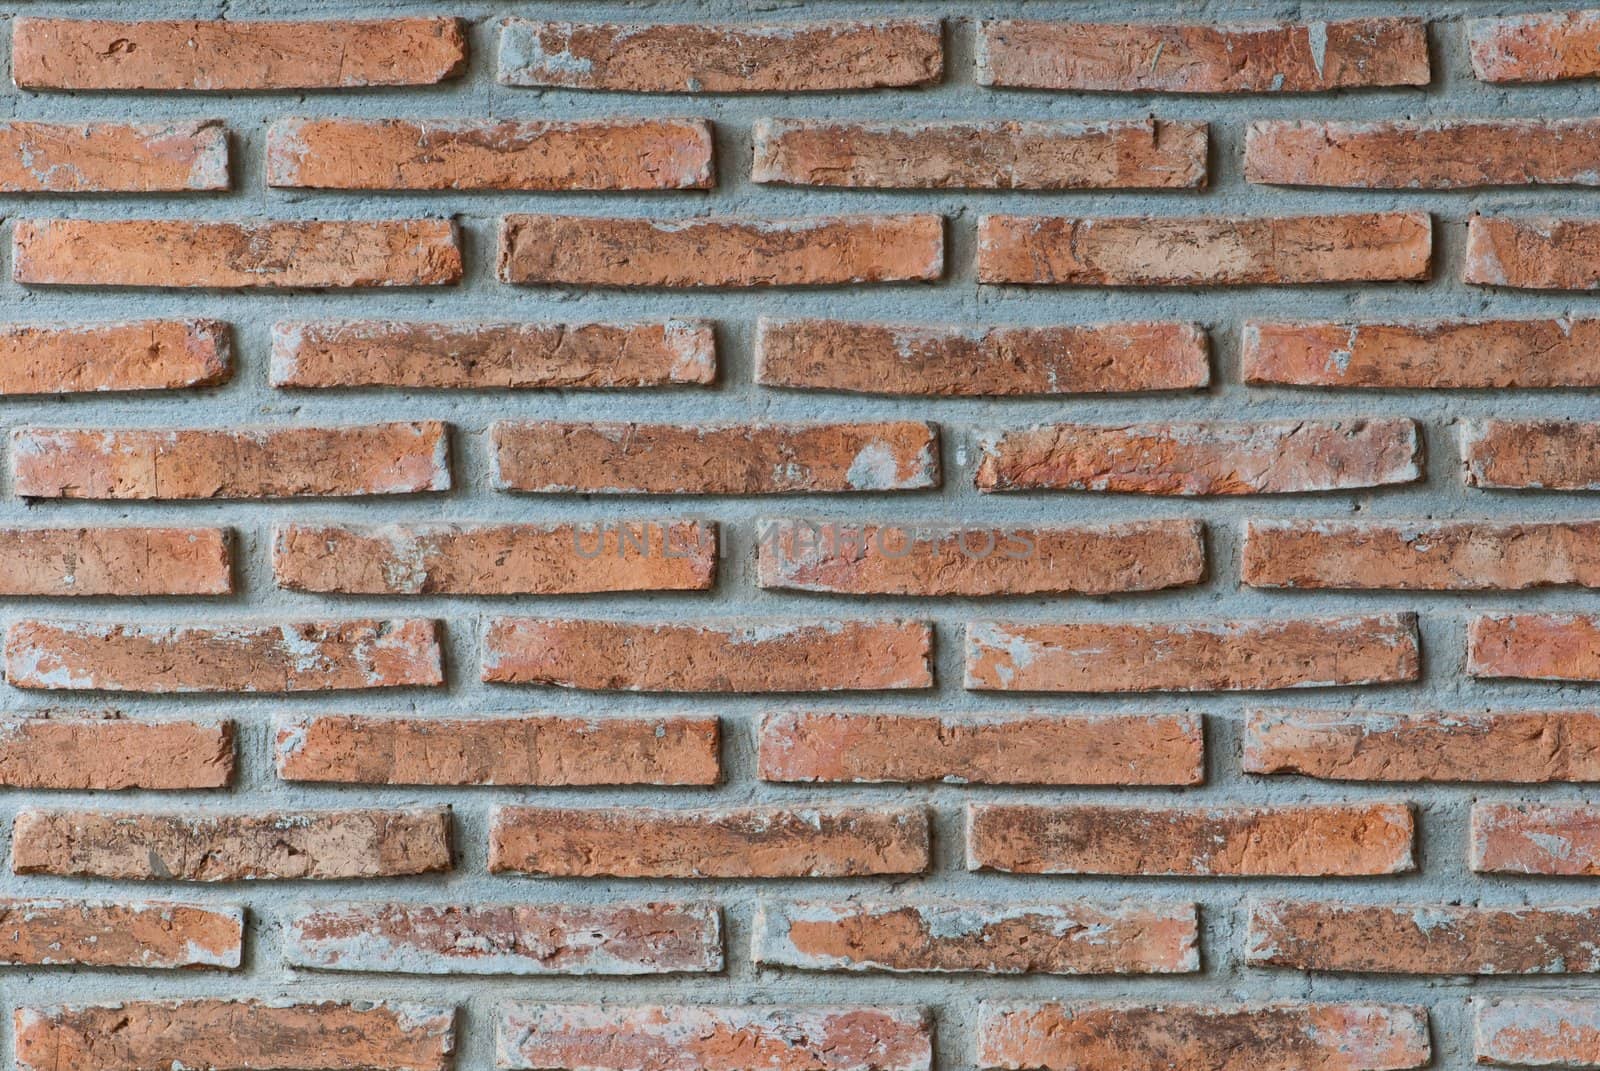 Brick wall background taken on a clundy day
